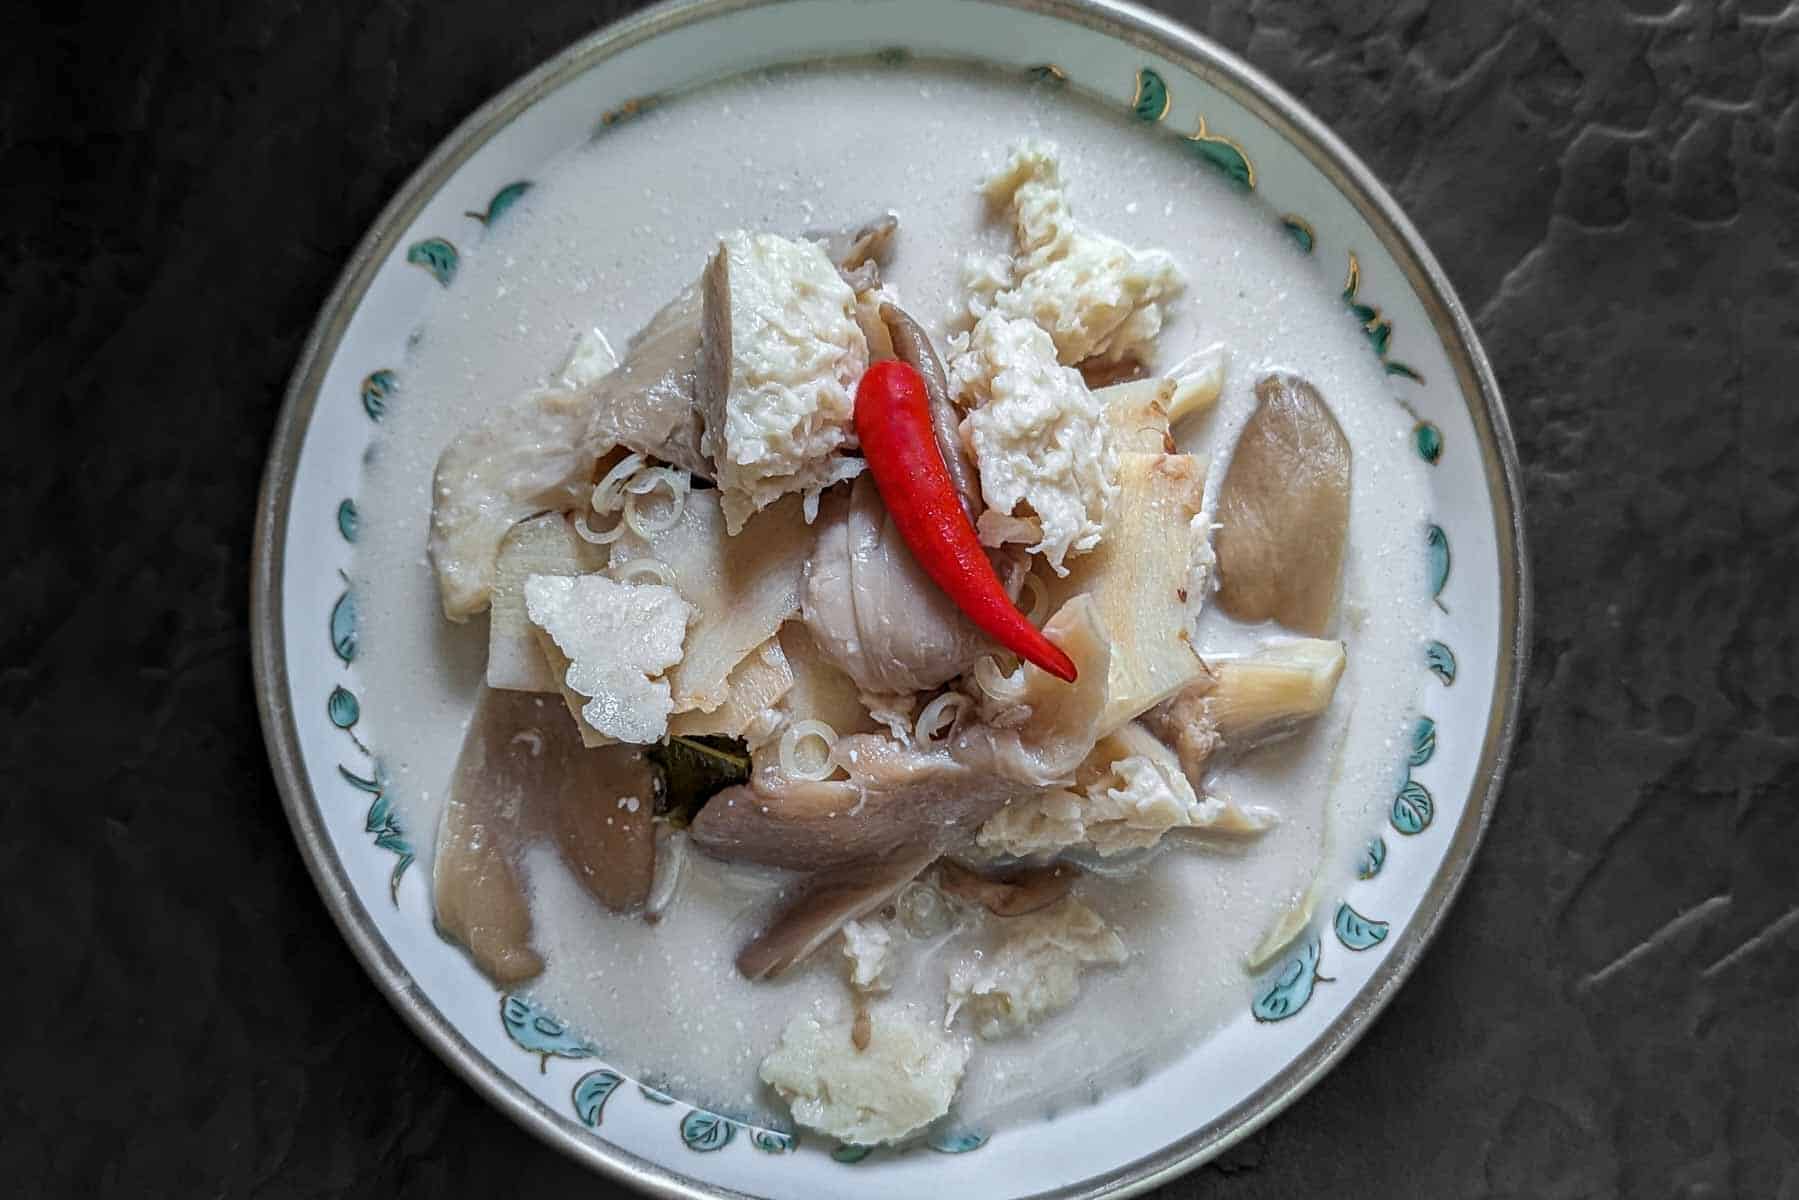 Black background with a bowl of tom kha soup on top. The bowl is shallow and features a silver rim and some blue-green pattern deeper in the bowl. The bowl contains white coconut based soup, with vegan chicken and oyster mushrooms piled up in the middle. There is a single small red chilli on top.